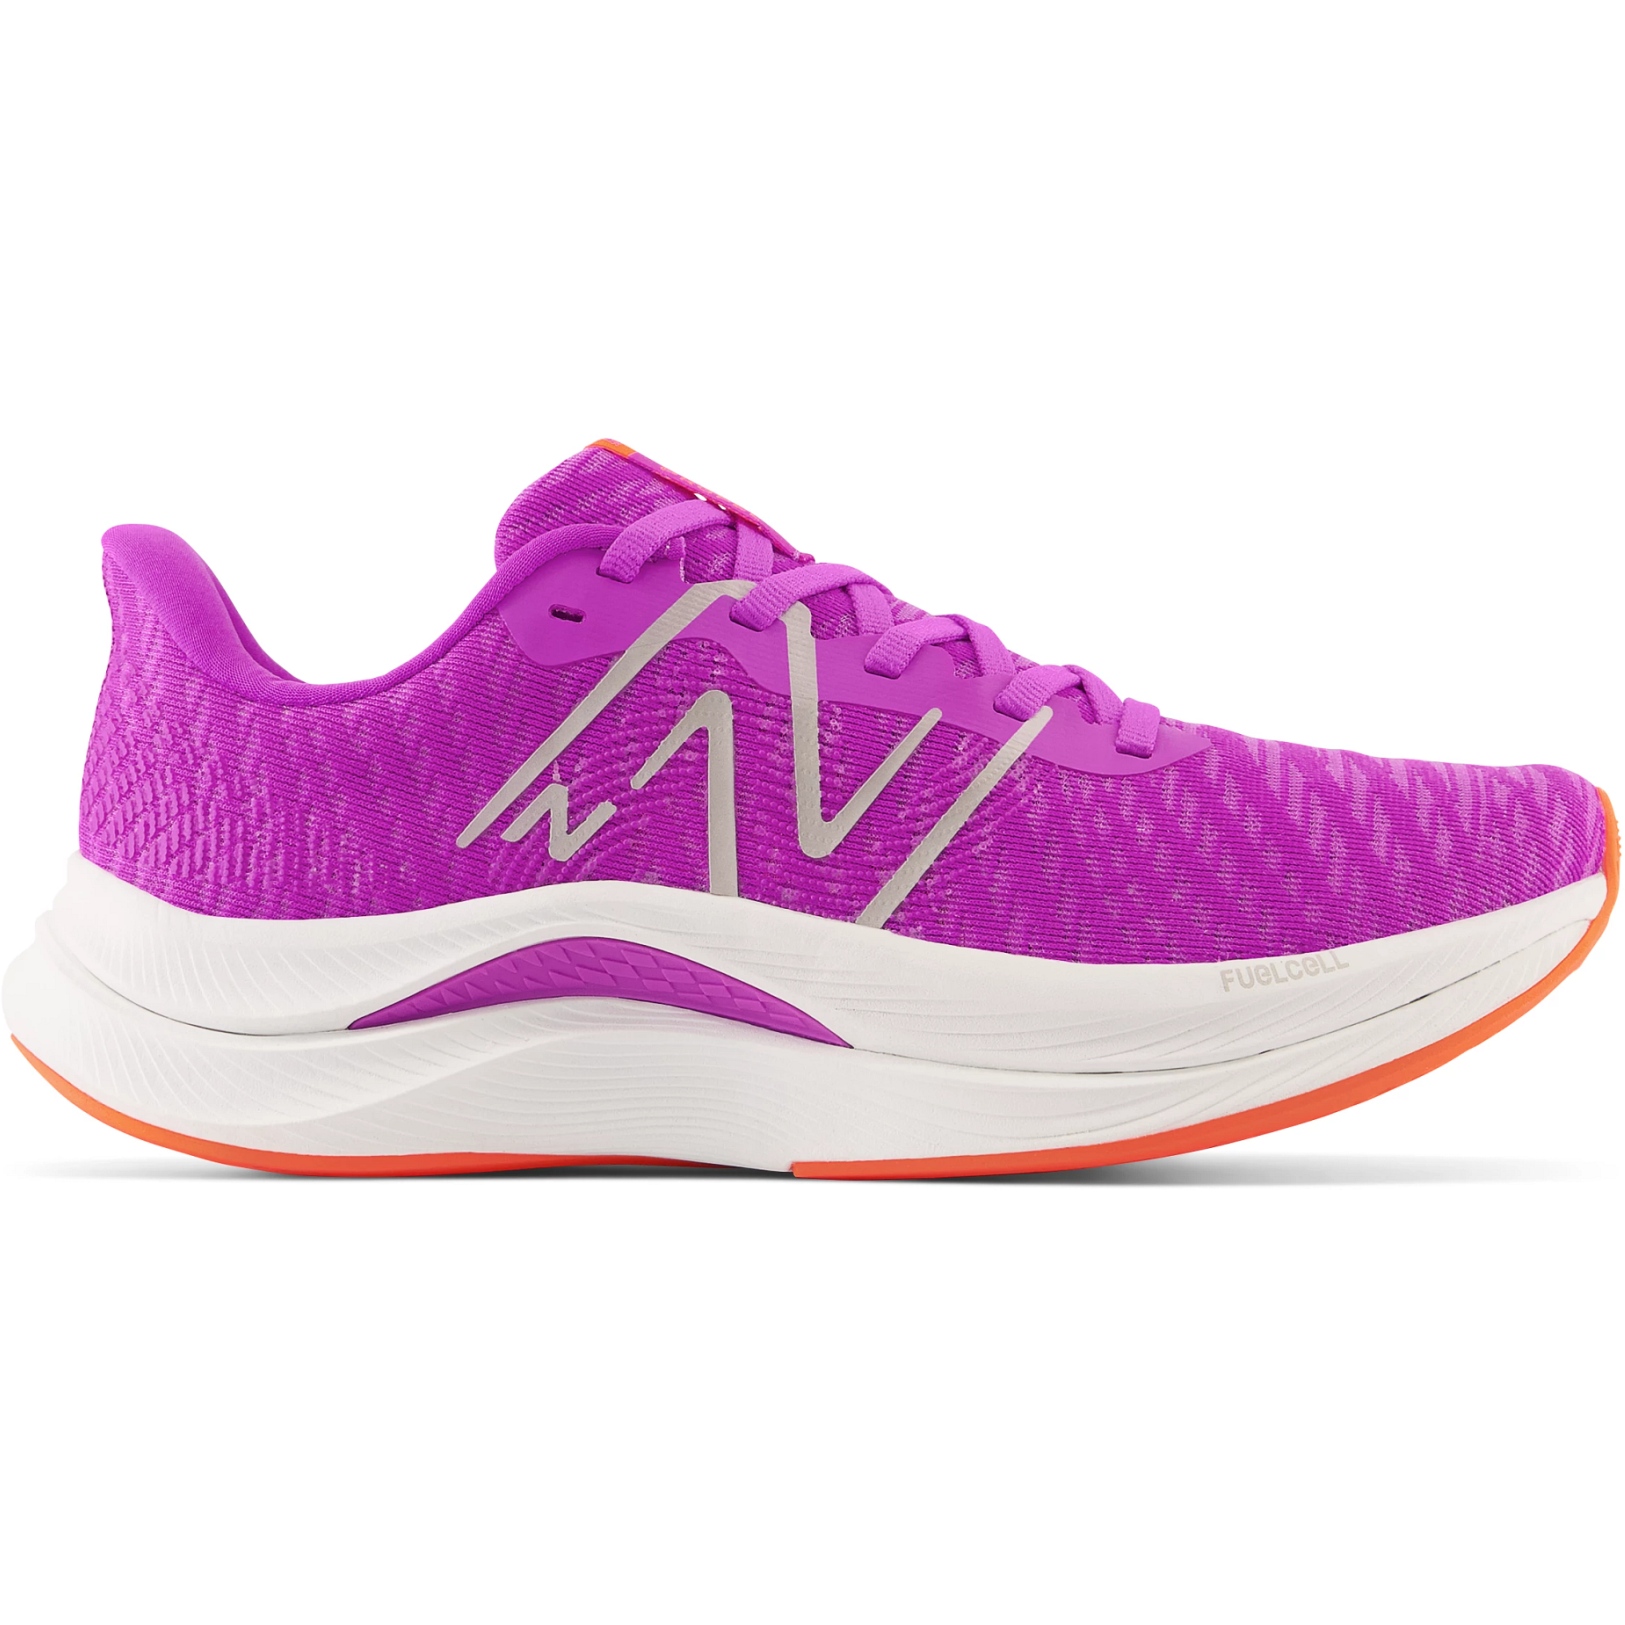 Productfoto van New Balance FuelCell Propel v4 Dames Hardloopschoenen - Cosmic Rose/White